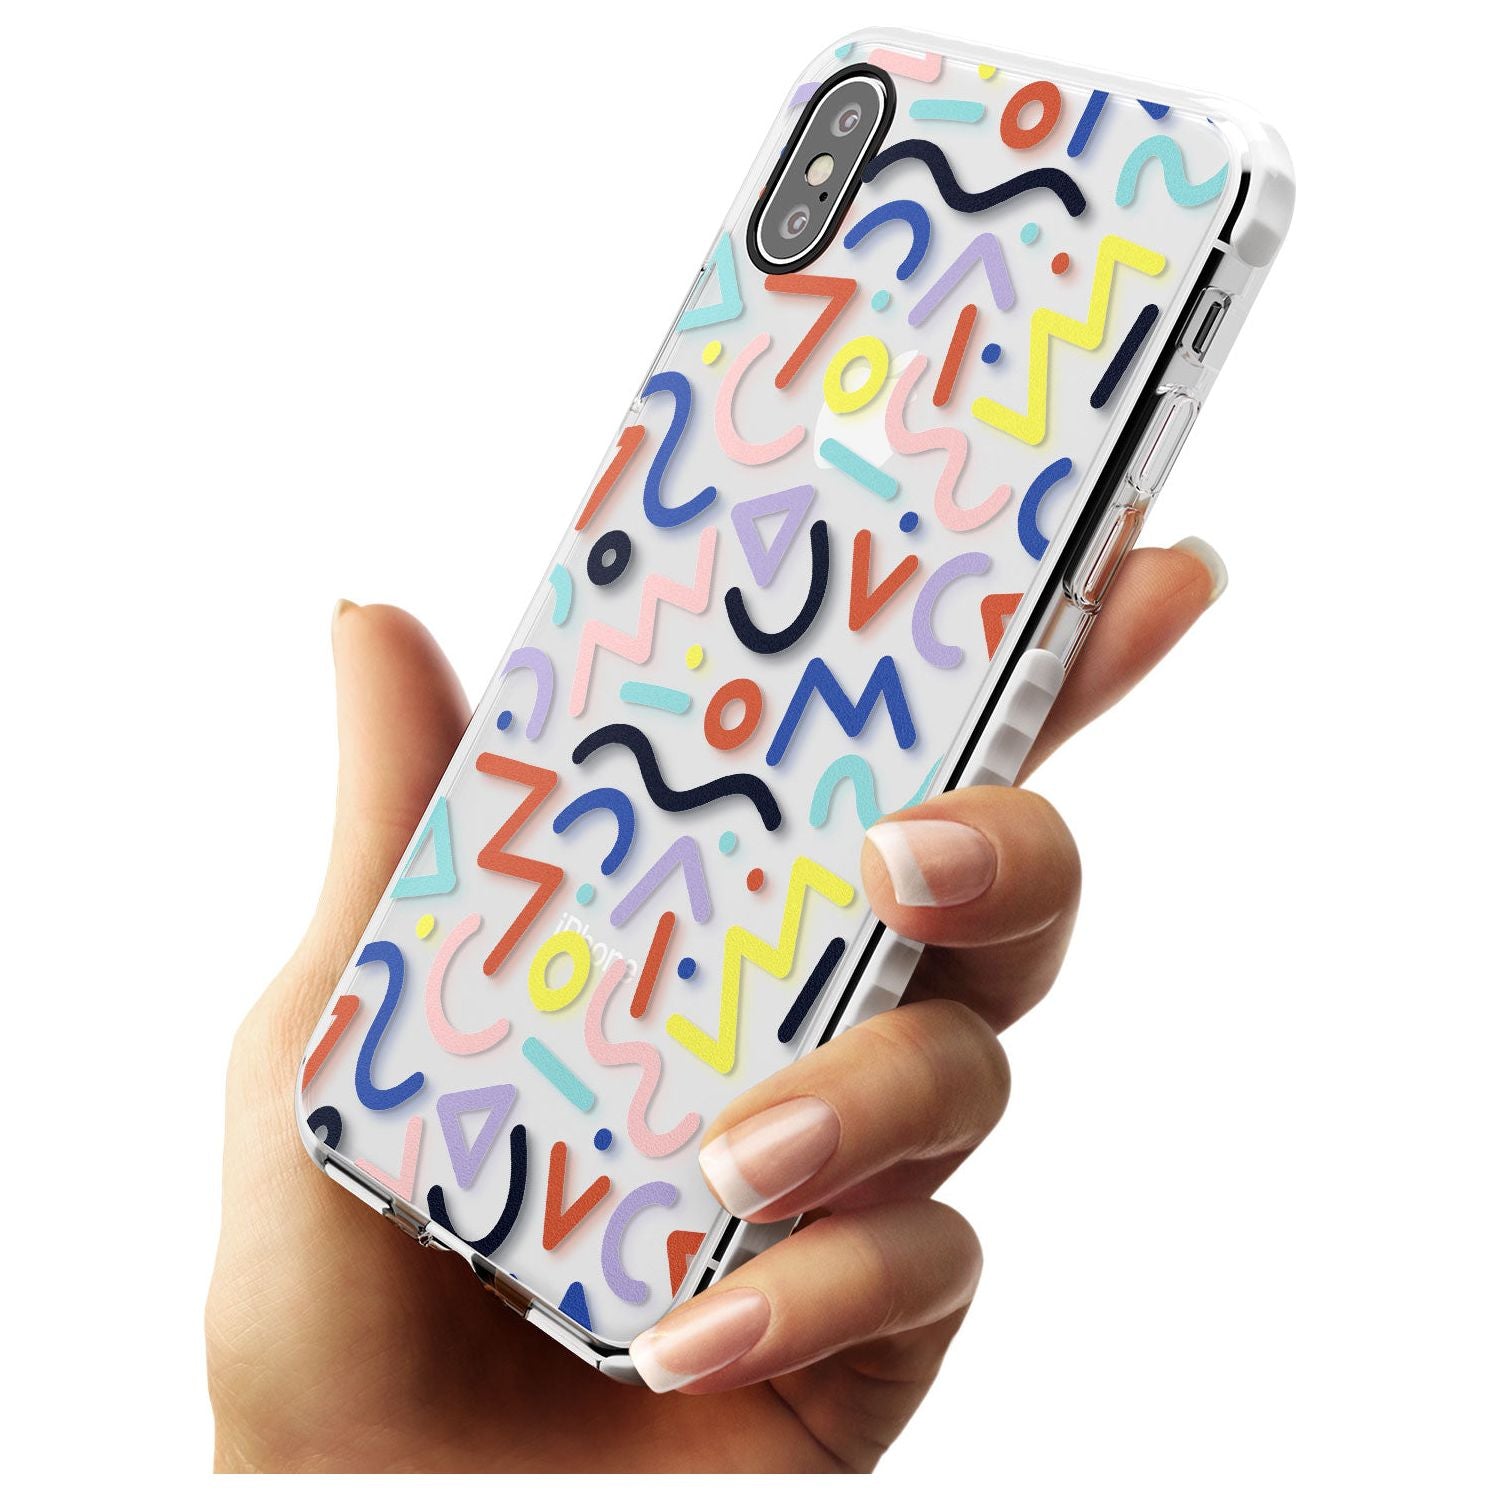 Colourful Squiggles Memphis Retro Pattern Design Impact Phone Case for iPhone X XS Max XR